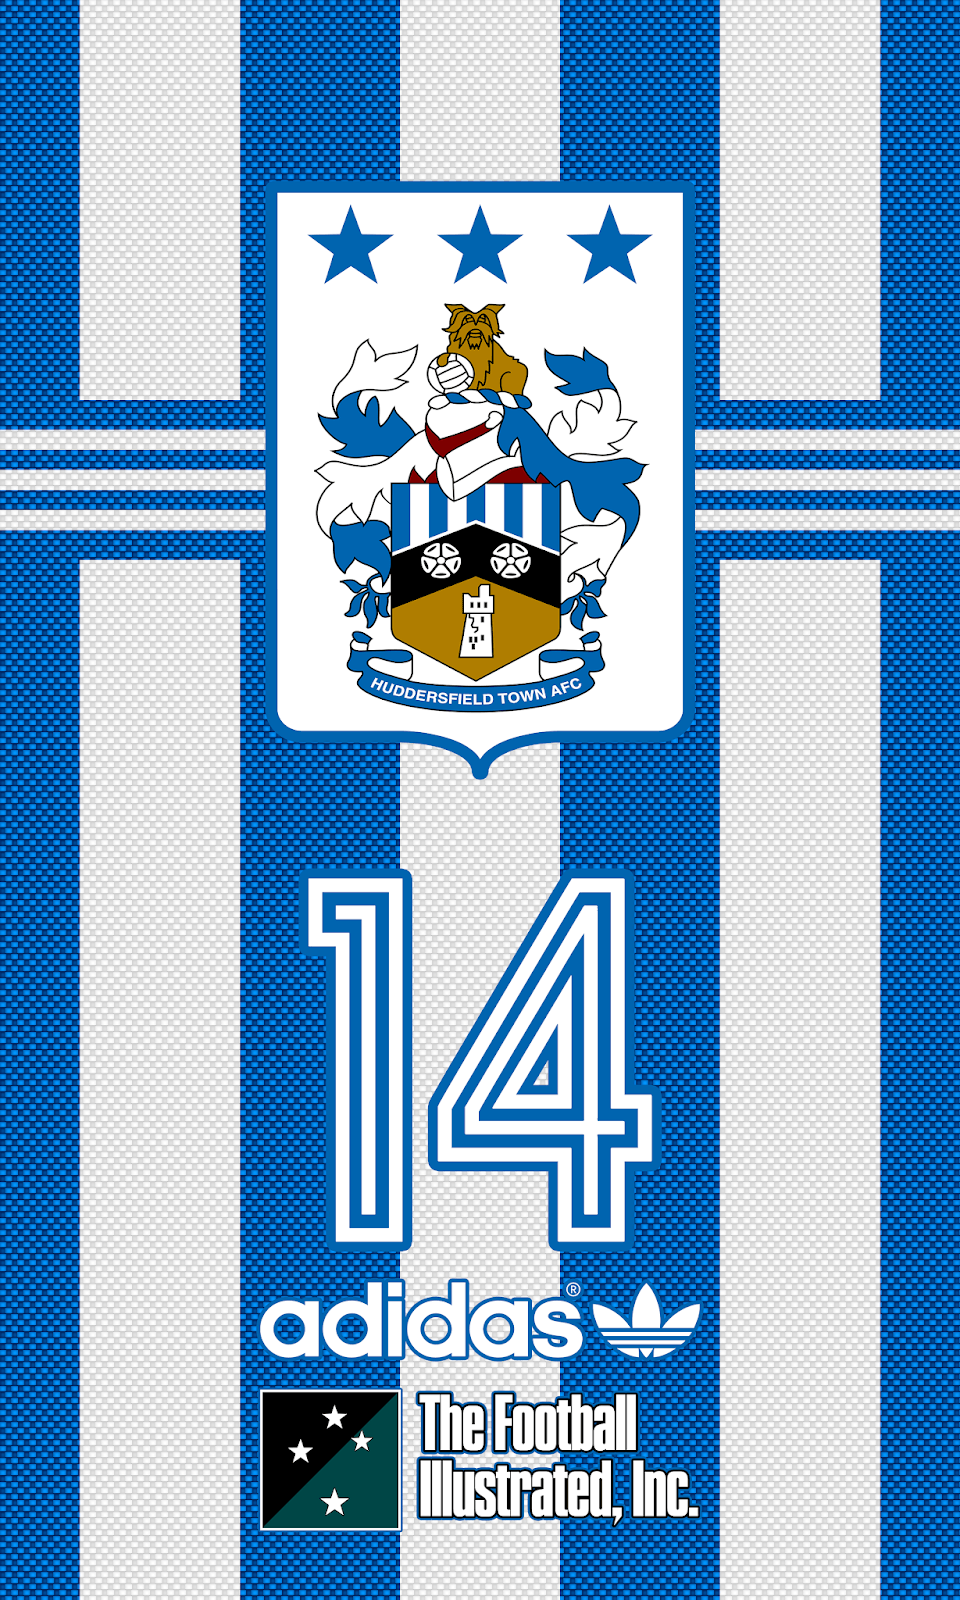 Wallpaper Huddersfield Town AFC. The Football Illustrated, Inc